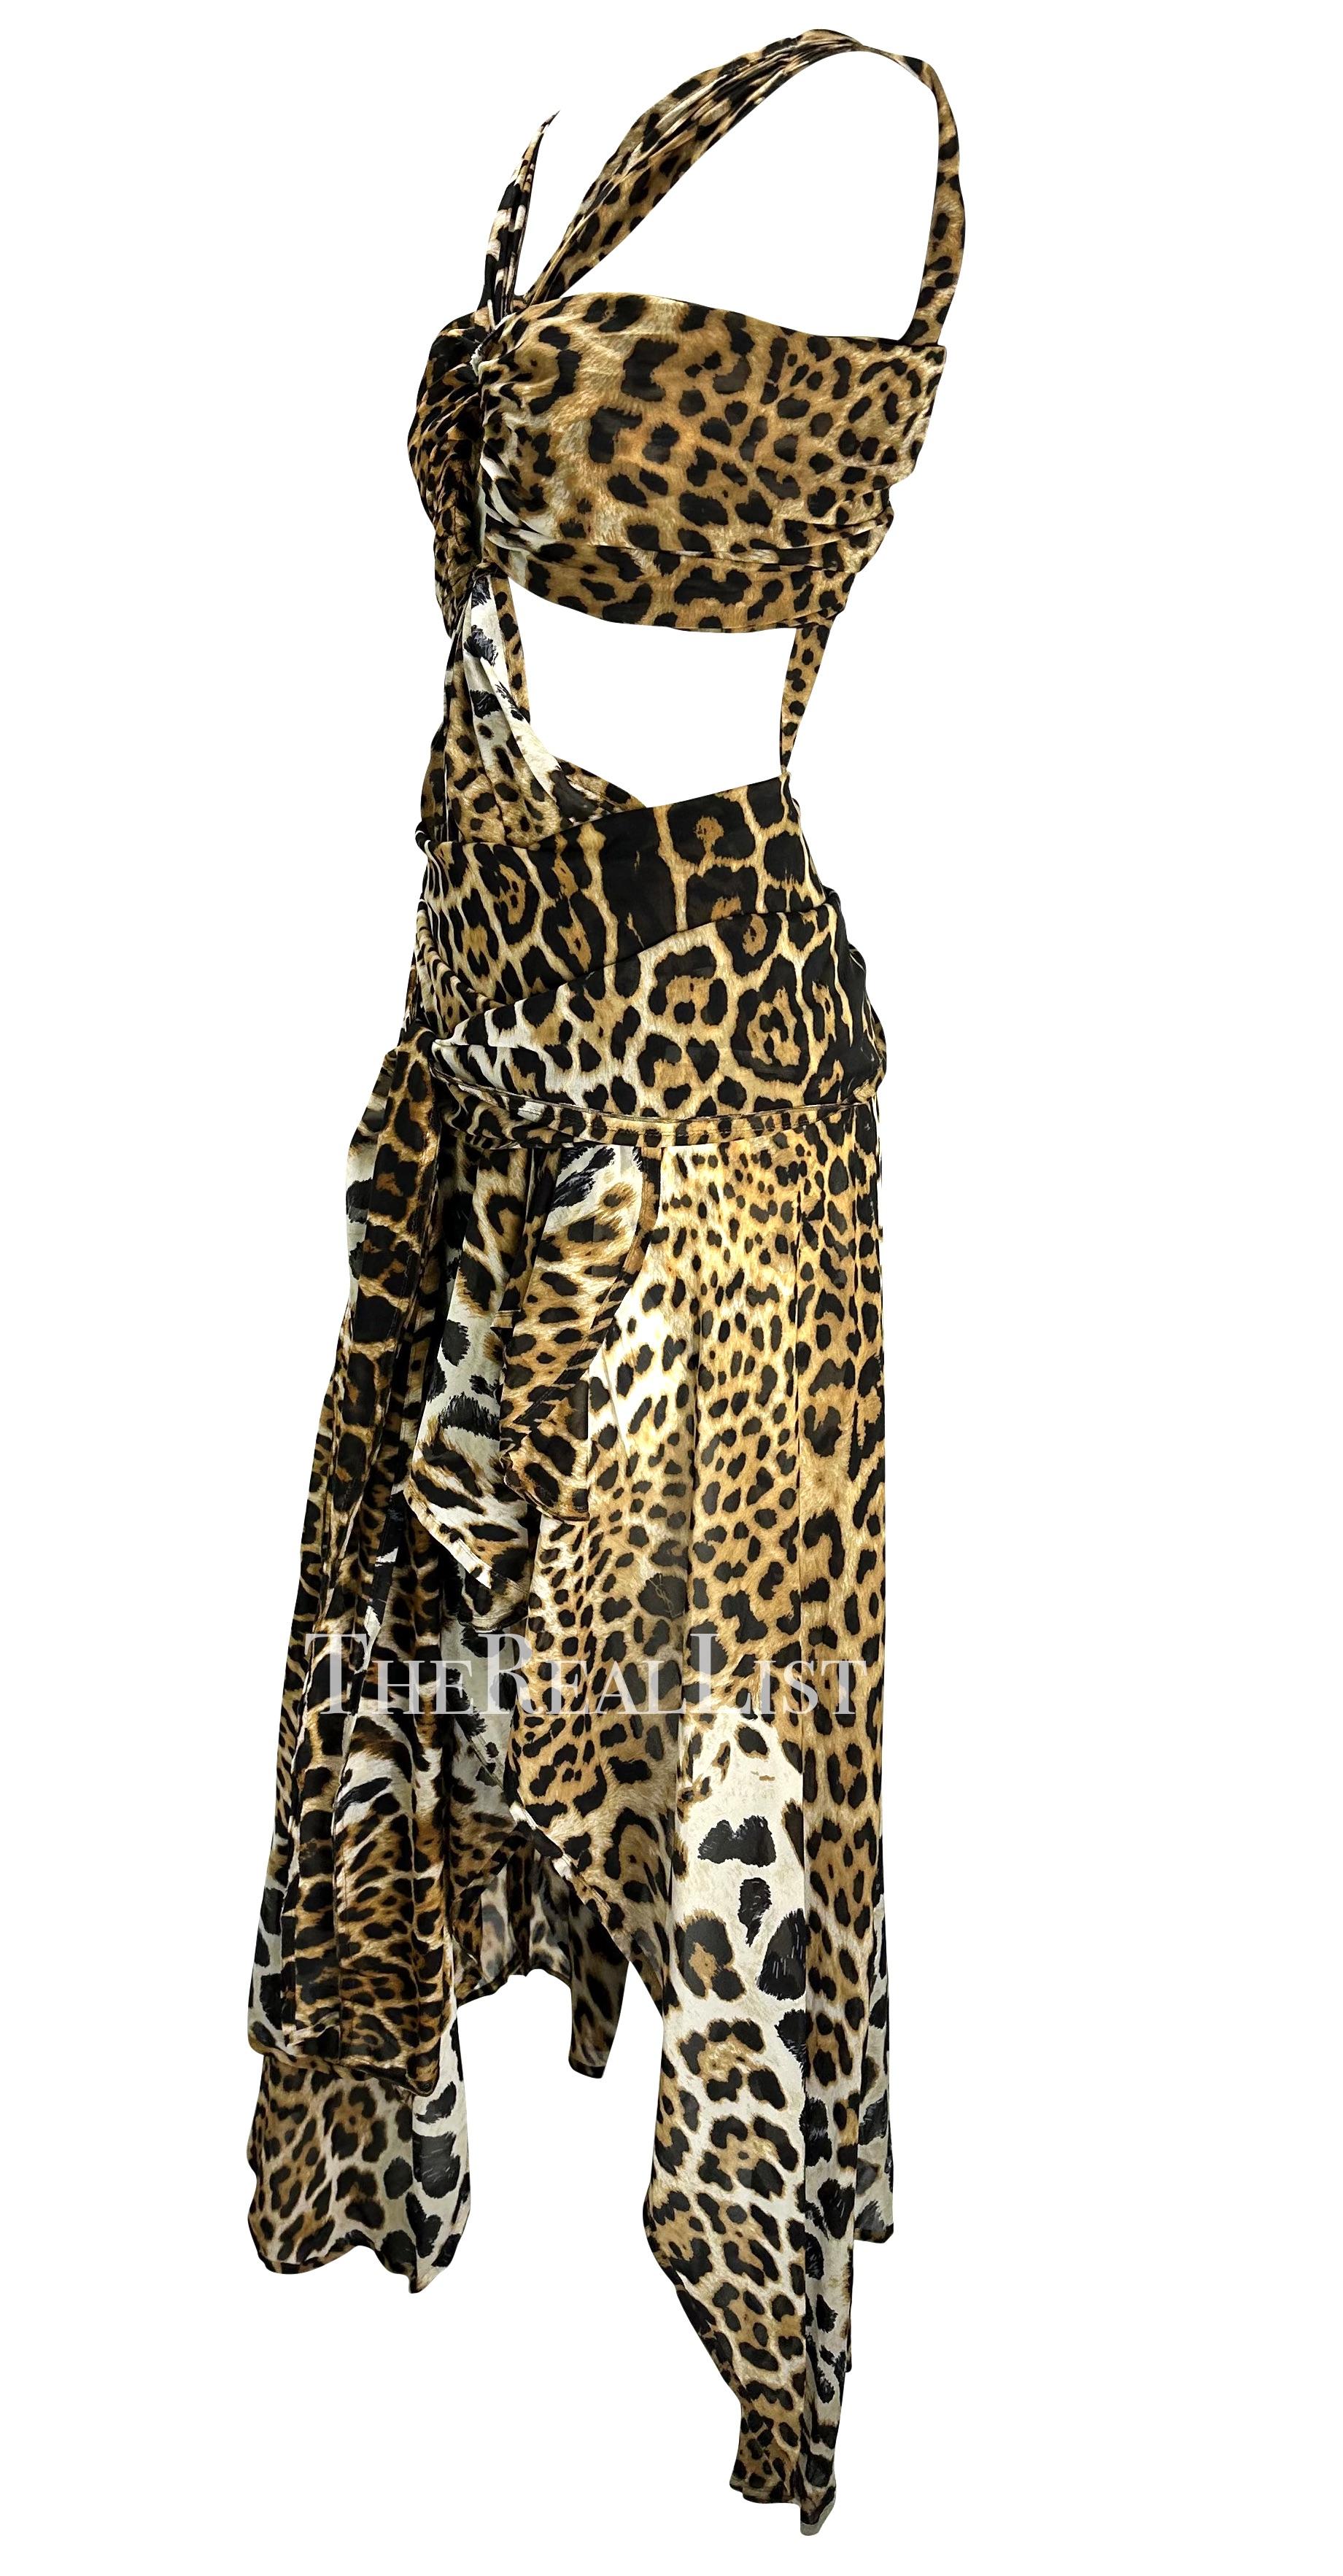 S/S 2002 Yves Saint Laurent by Tom Ford Runway Cheetah Print Chiffon Wrap Gown For Sale 1